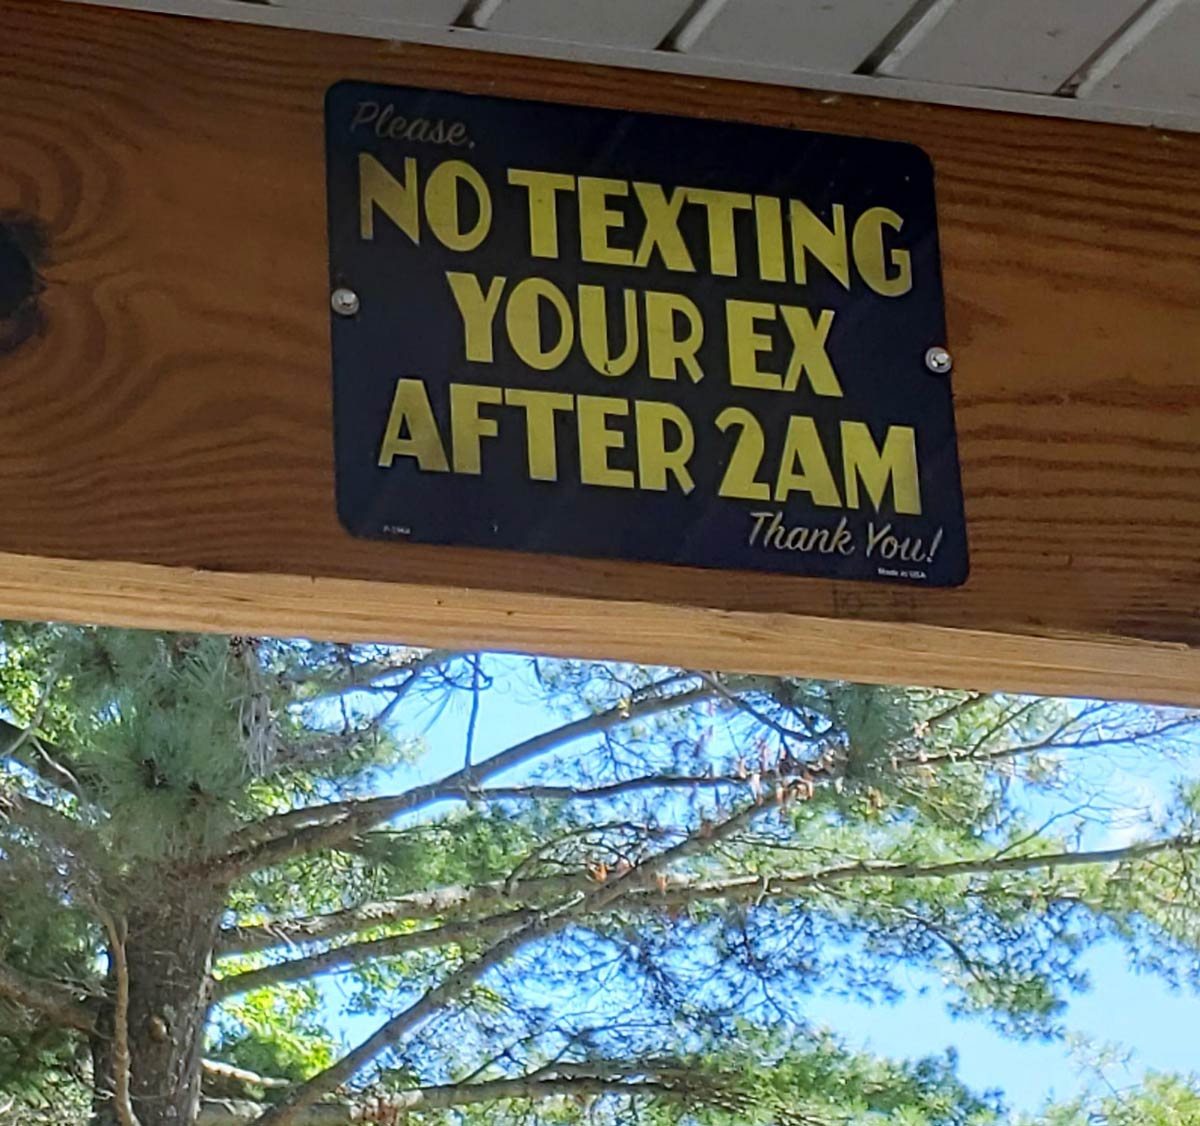 At an outdoor bar... I'm sure not many people actually heed the warning after a few drinks